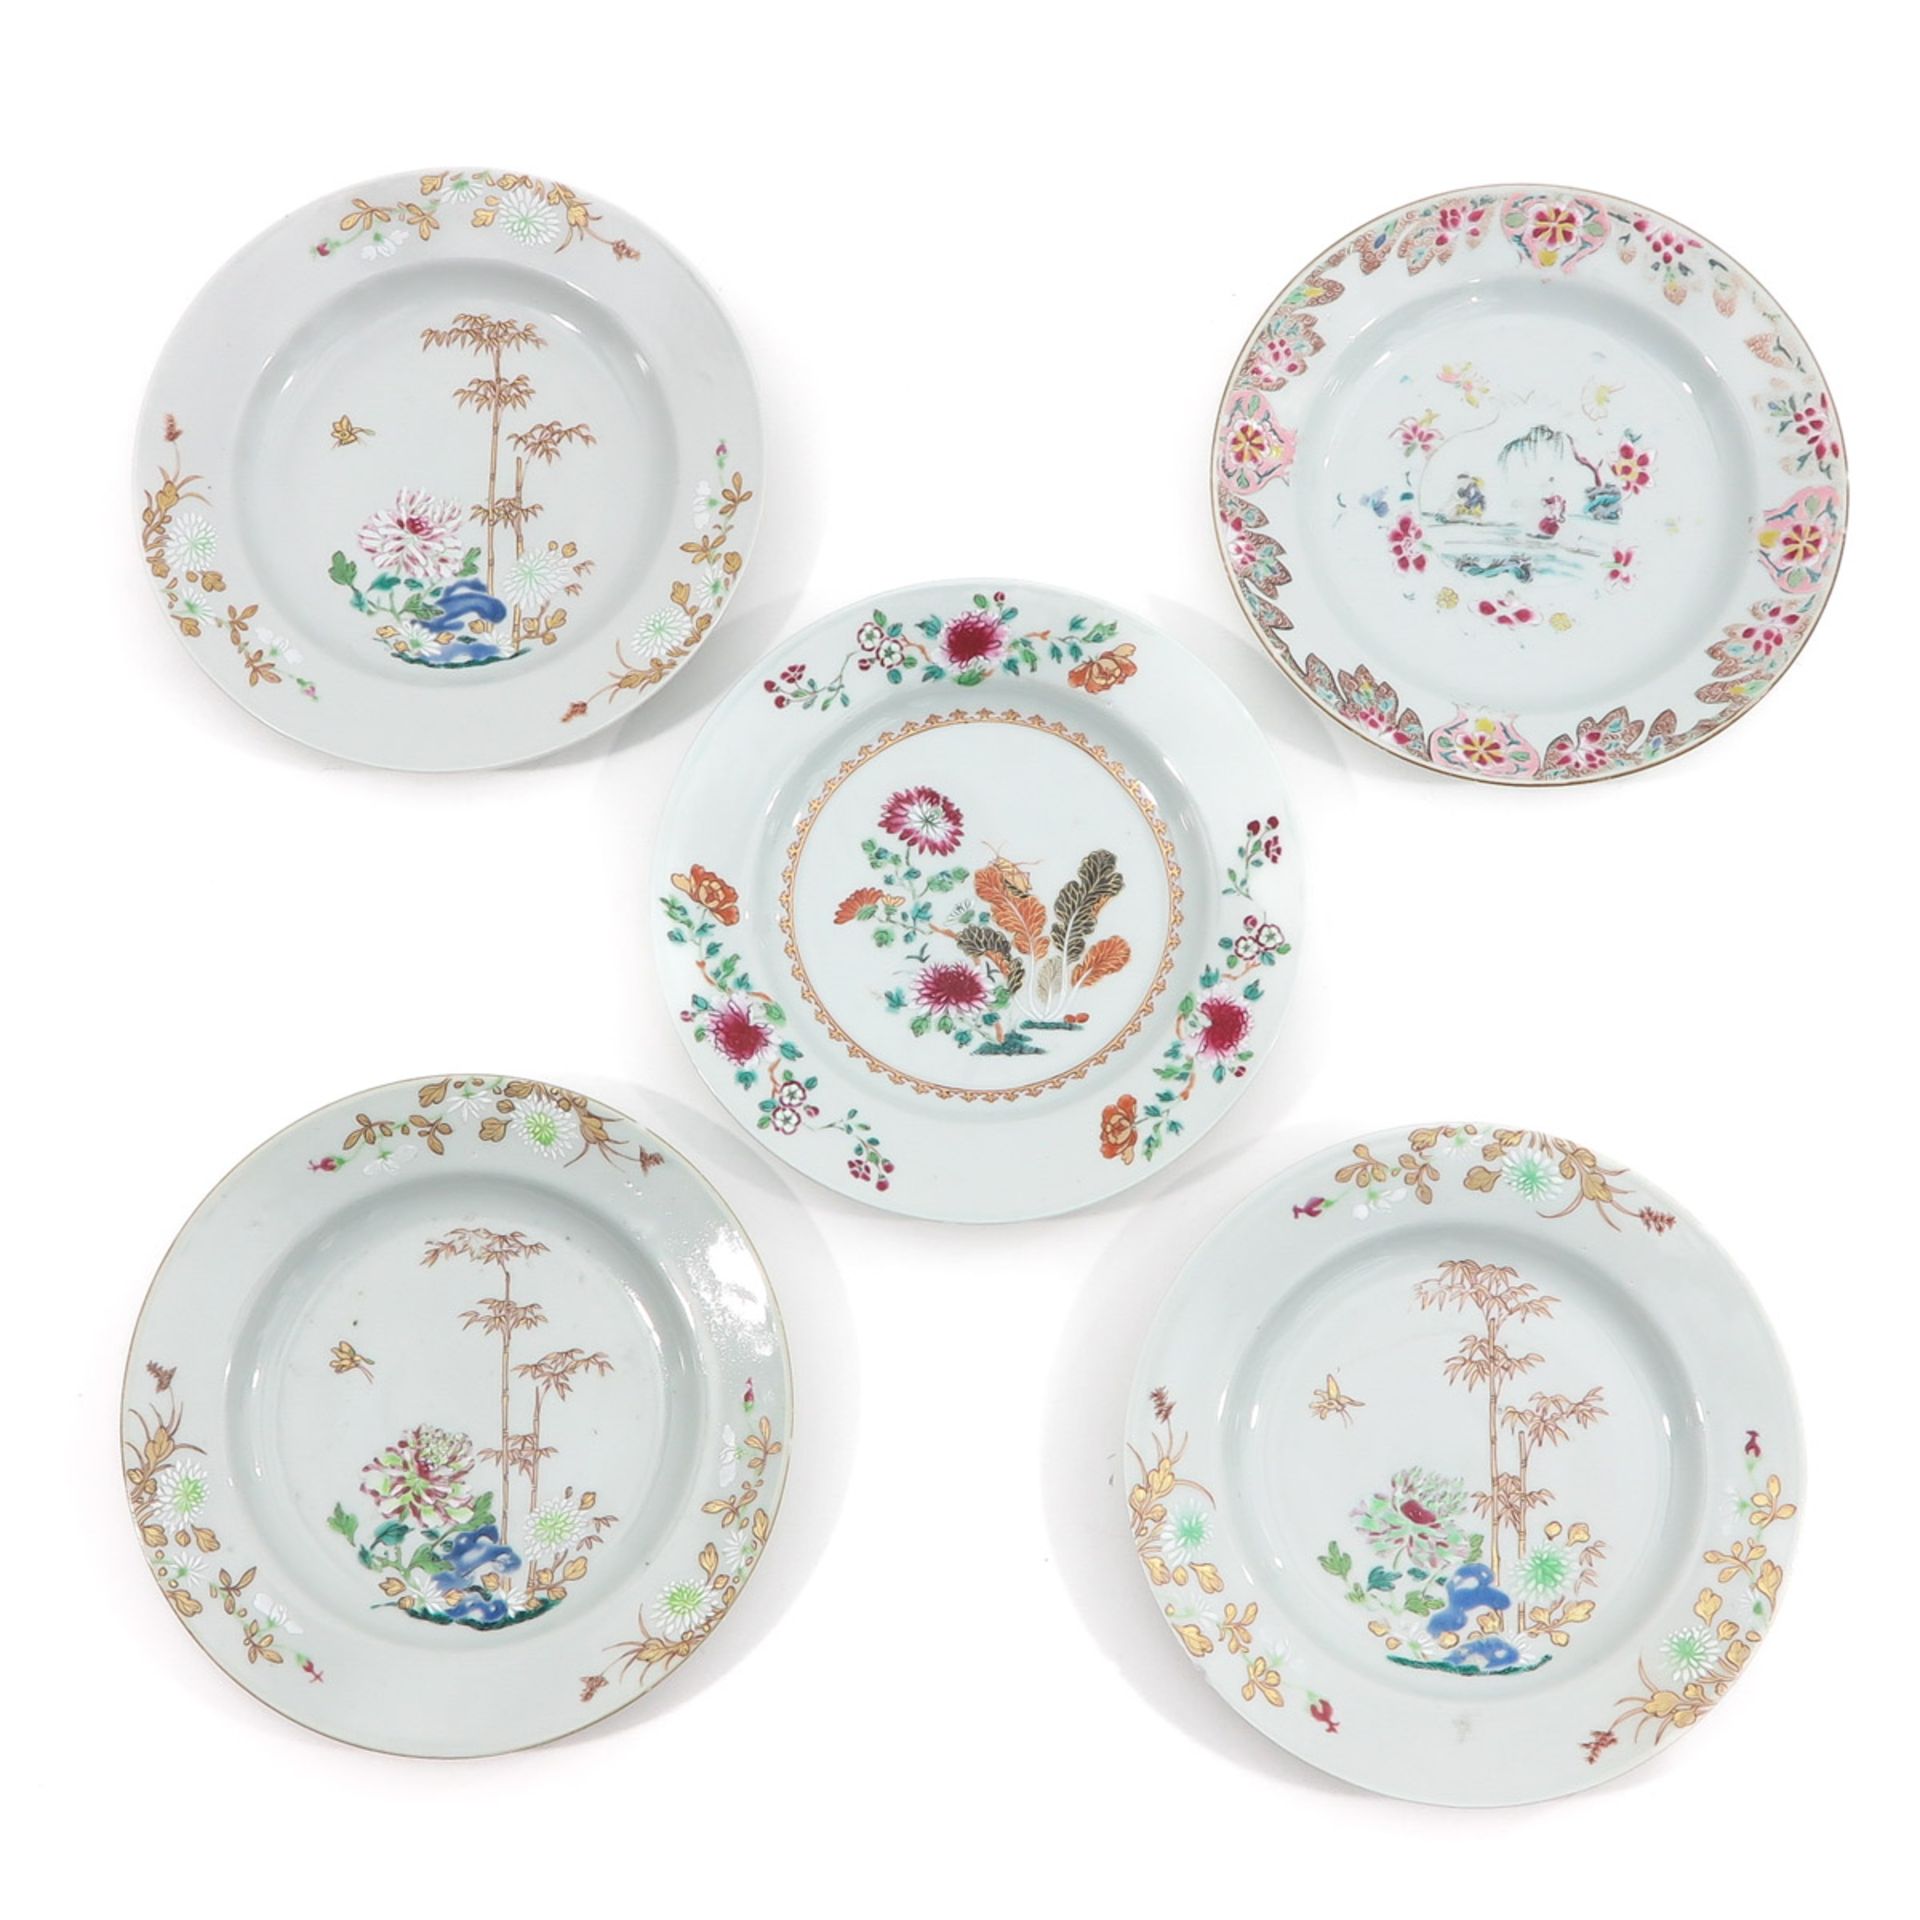 A Collection of 5 Famille Rose Plates